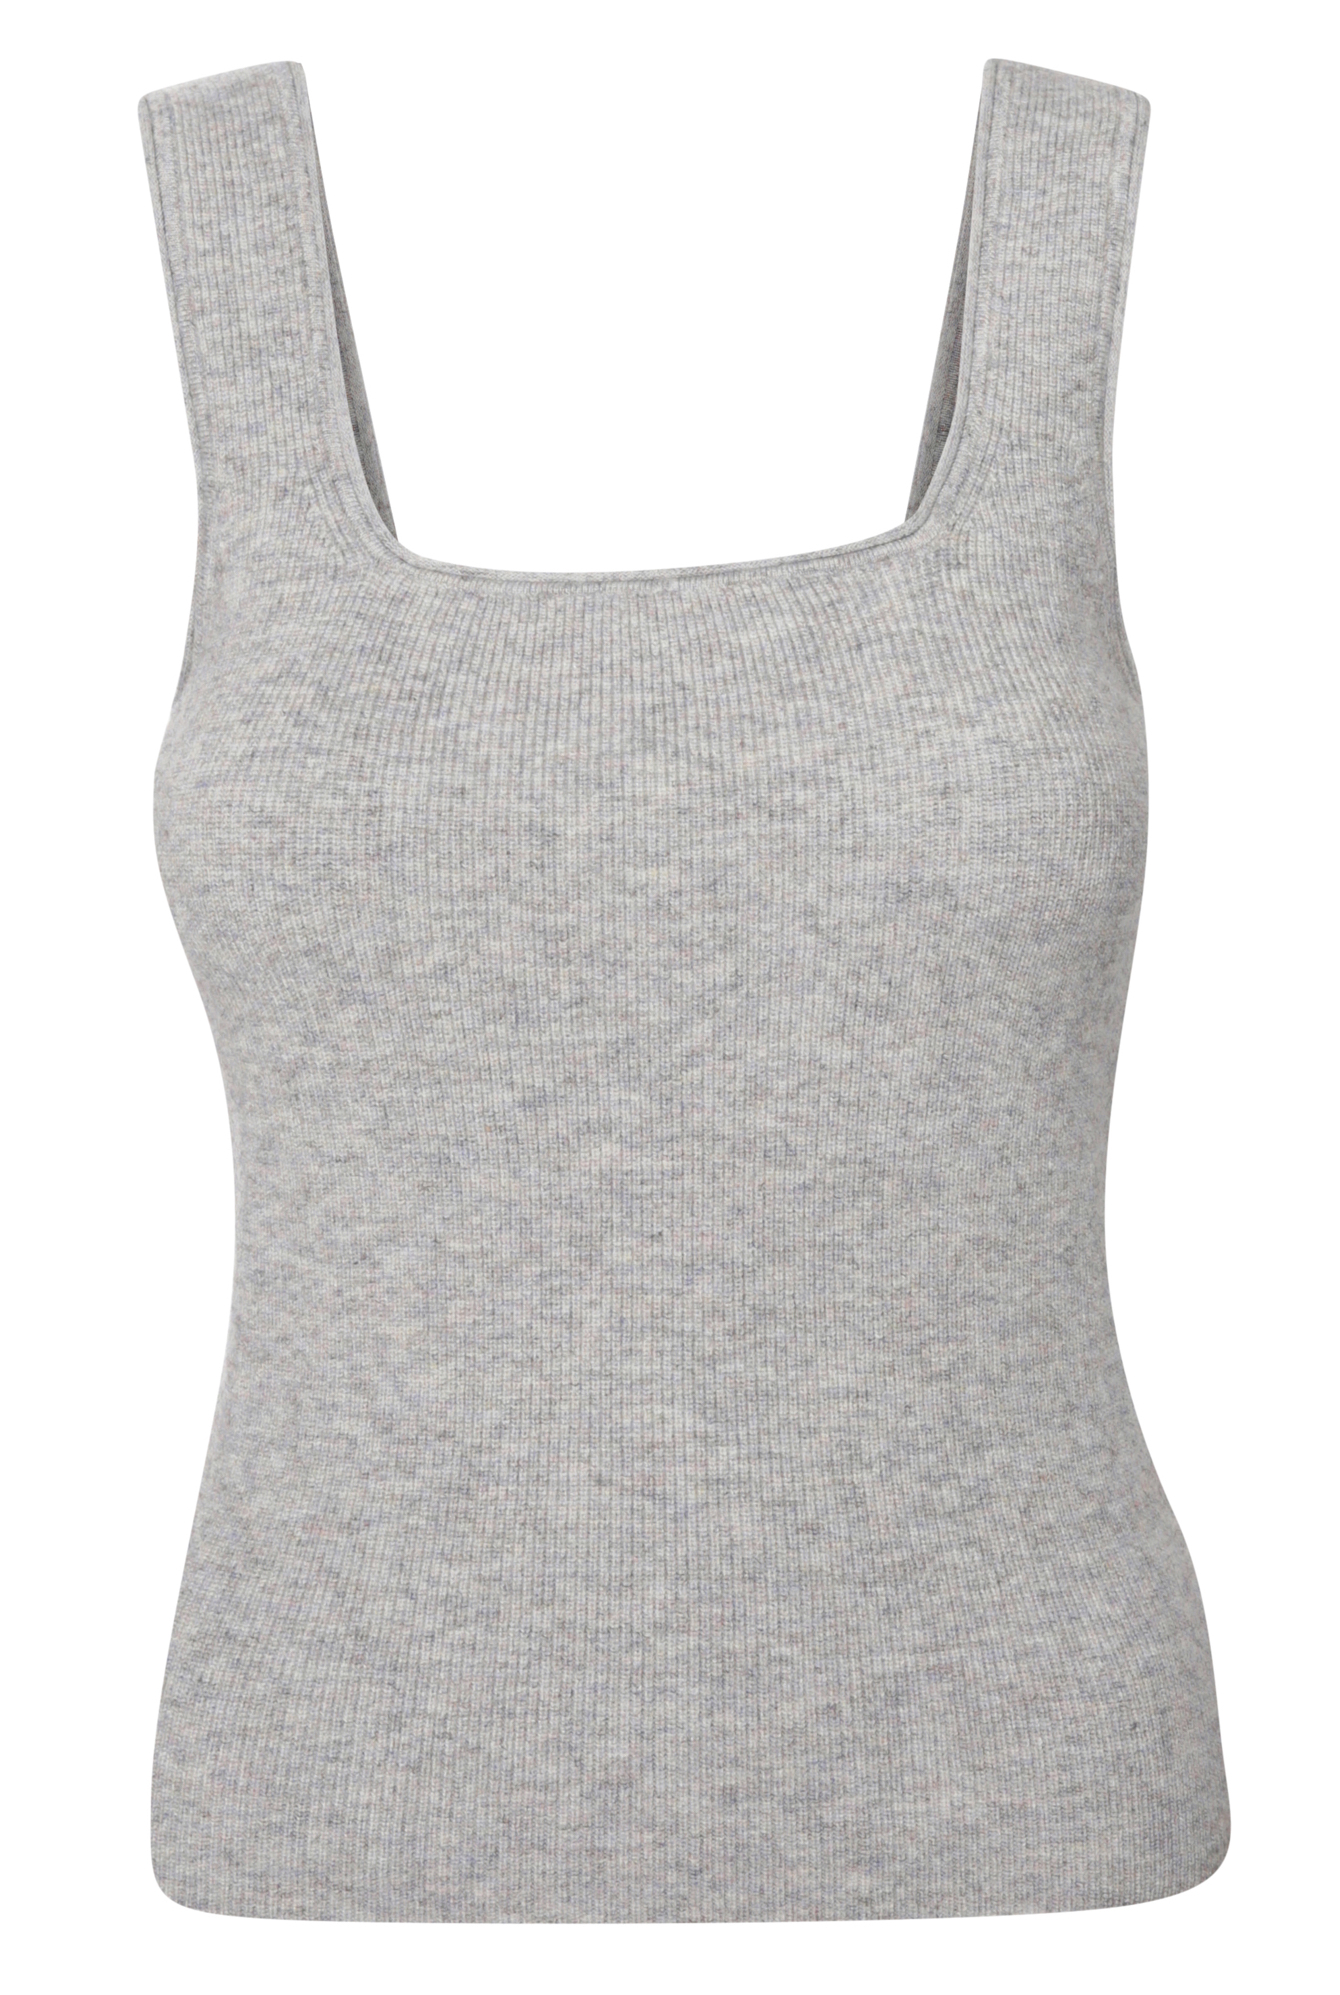 Current Air Sleeveless Square Neck Top